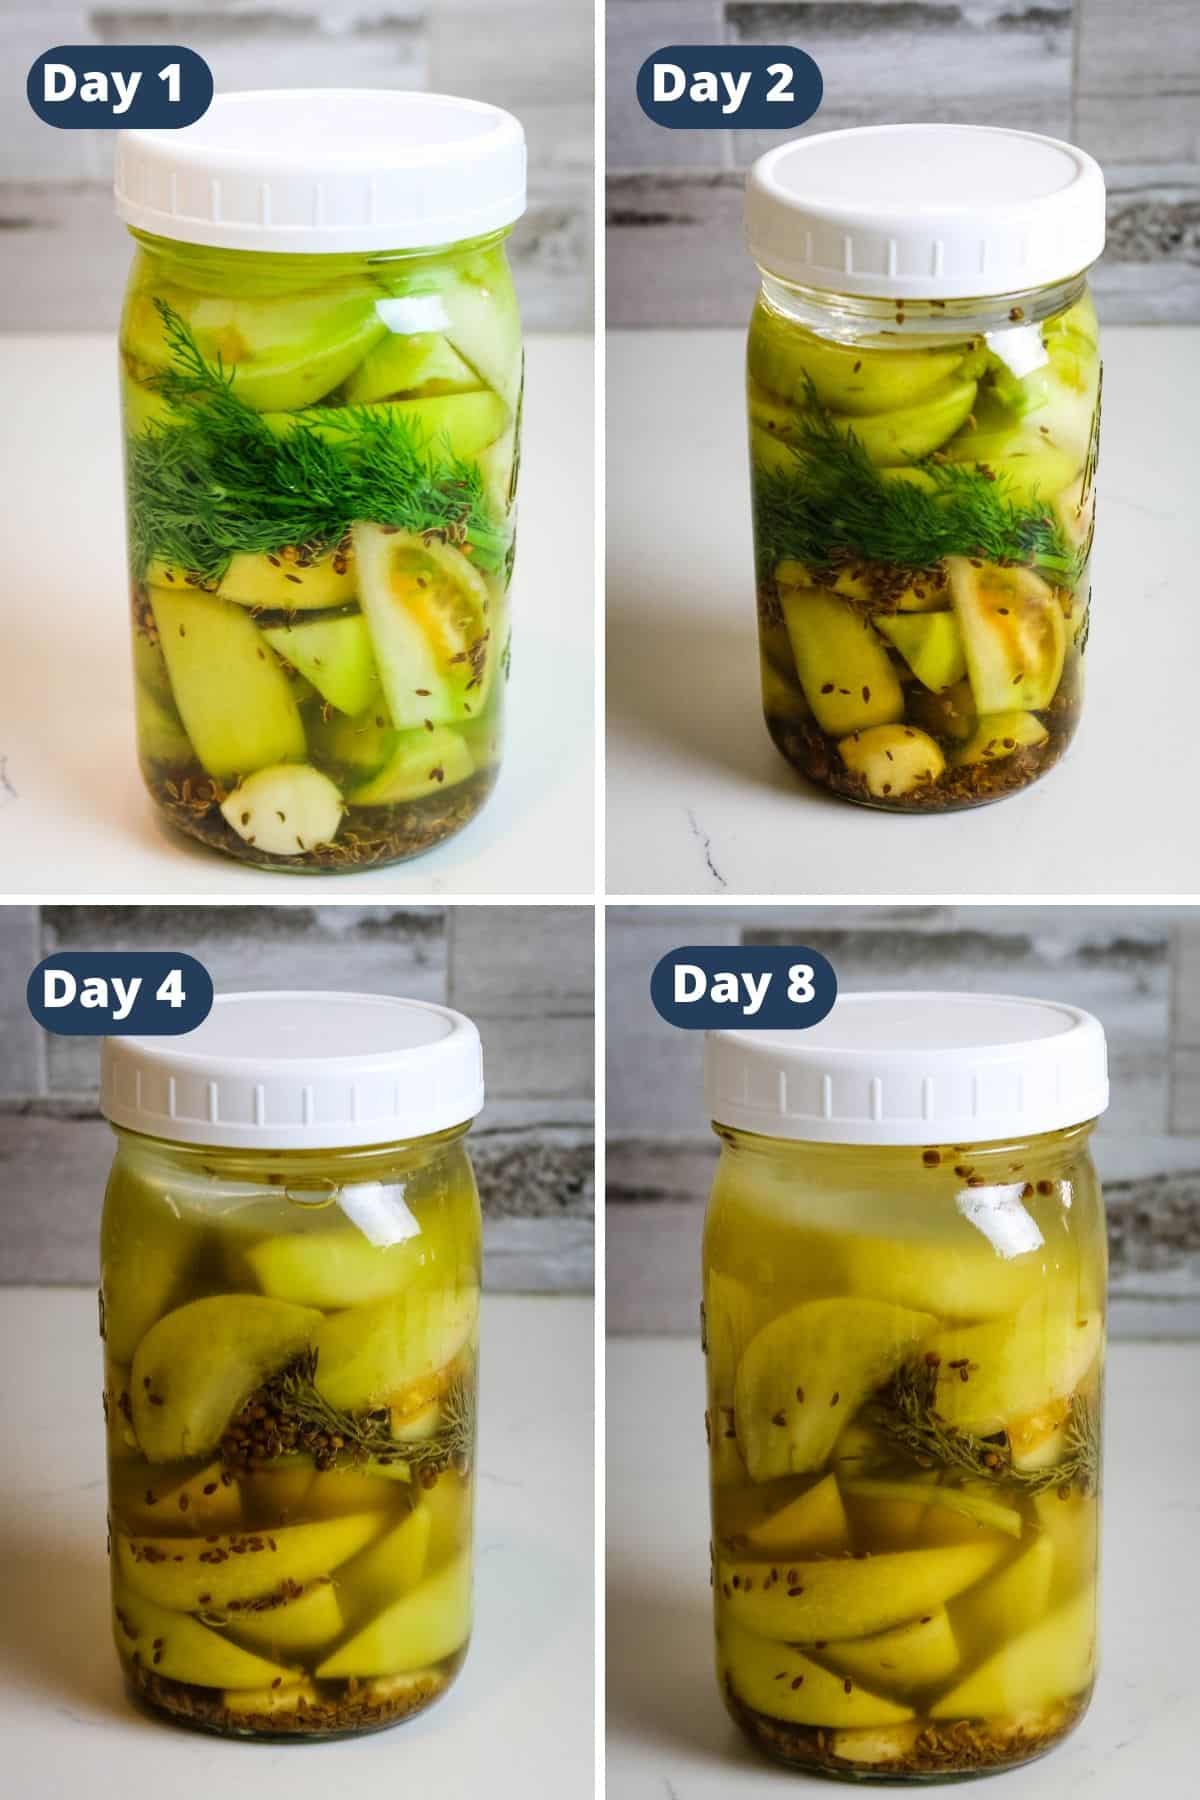 transformation of lacto fermented tomatoes over a period of 8 days.